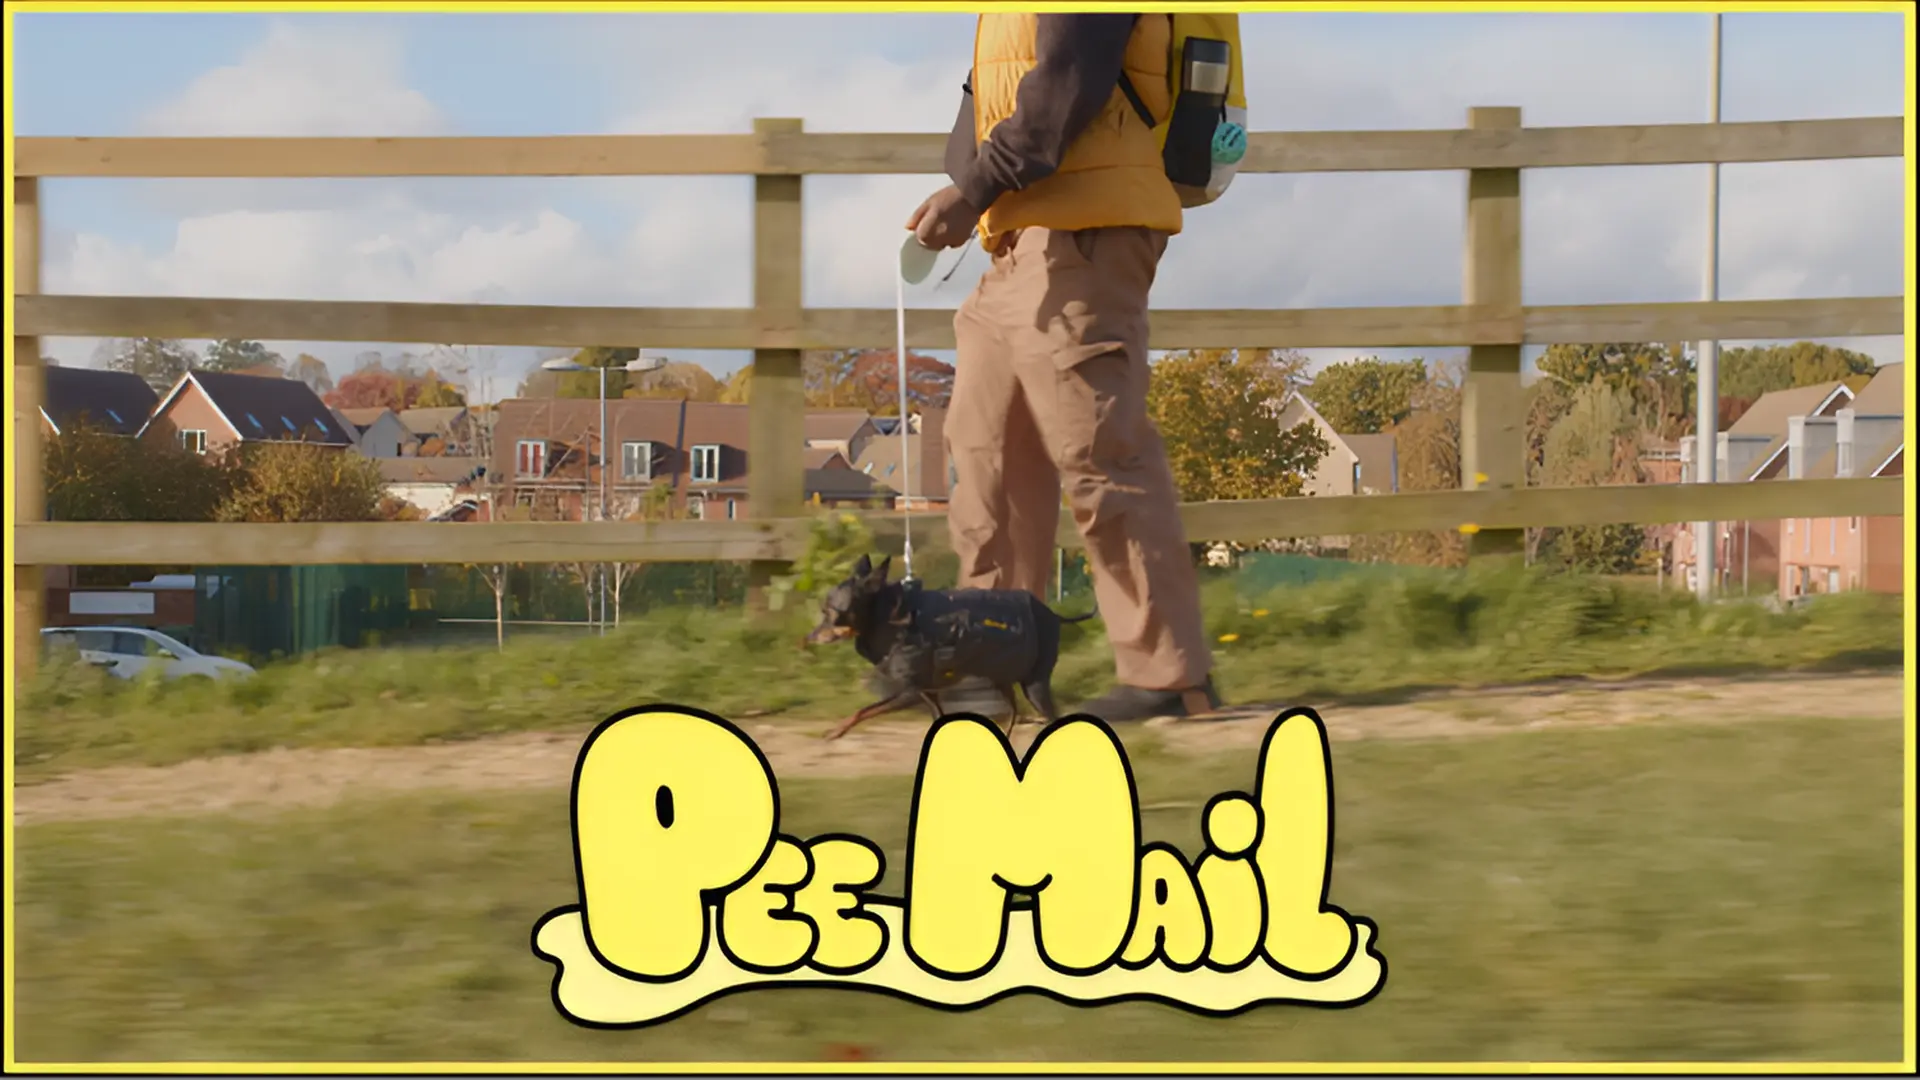 Peemail film poster with Monty on a walk